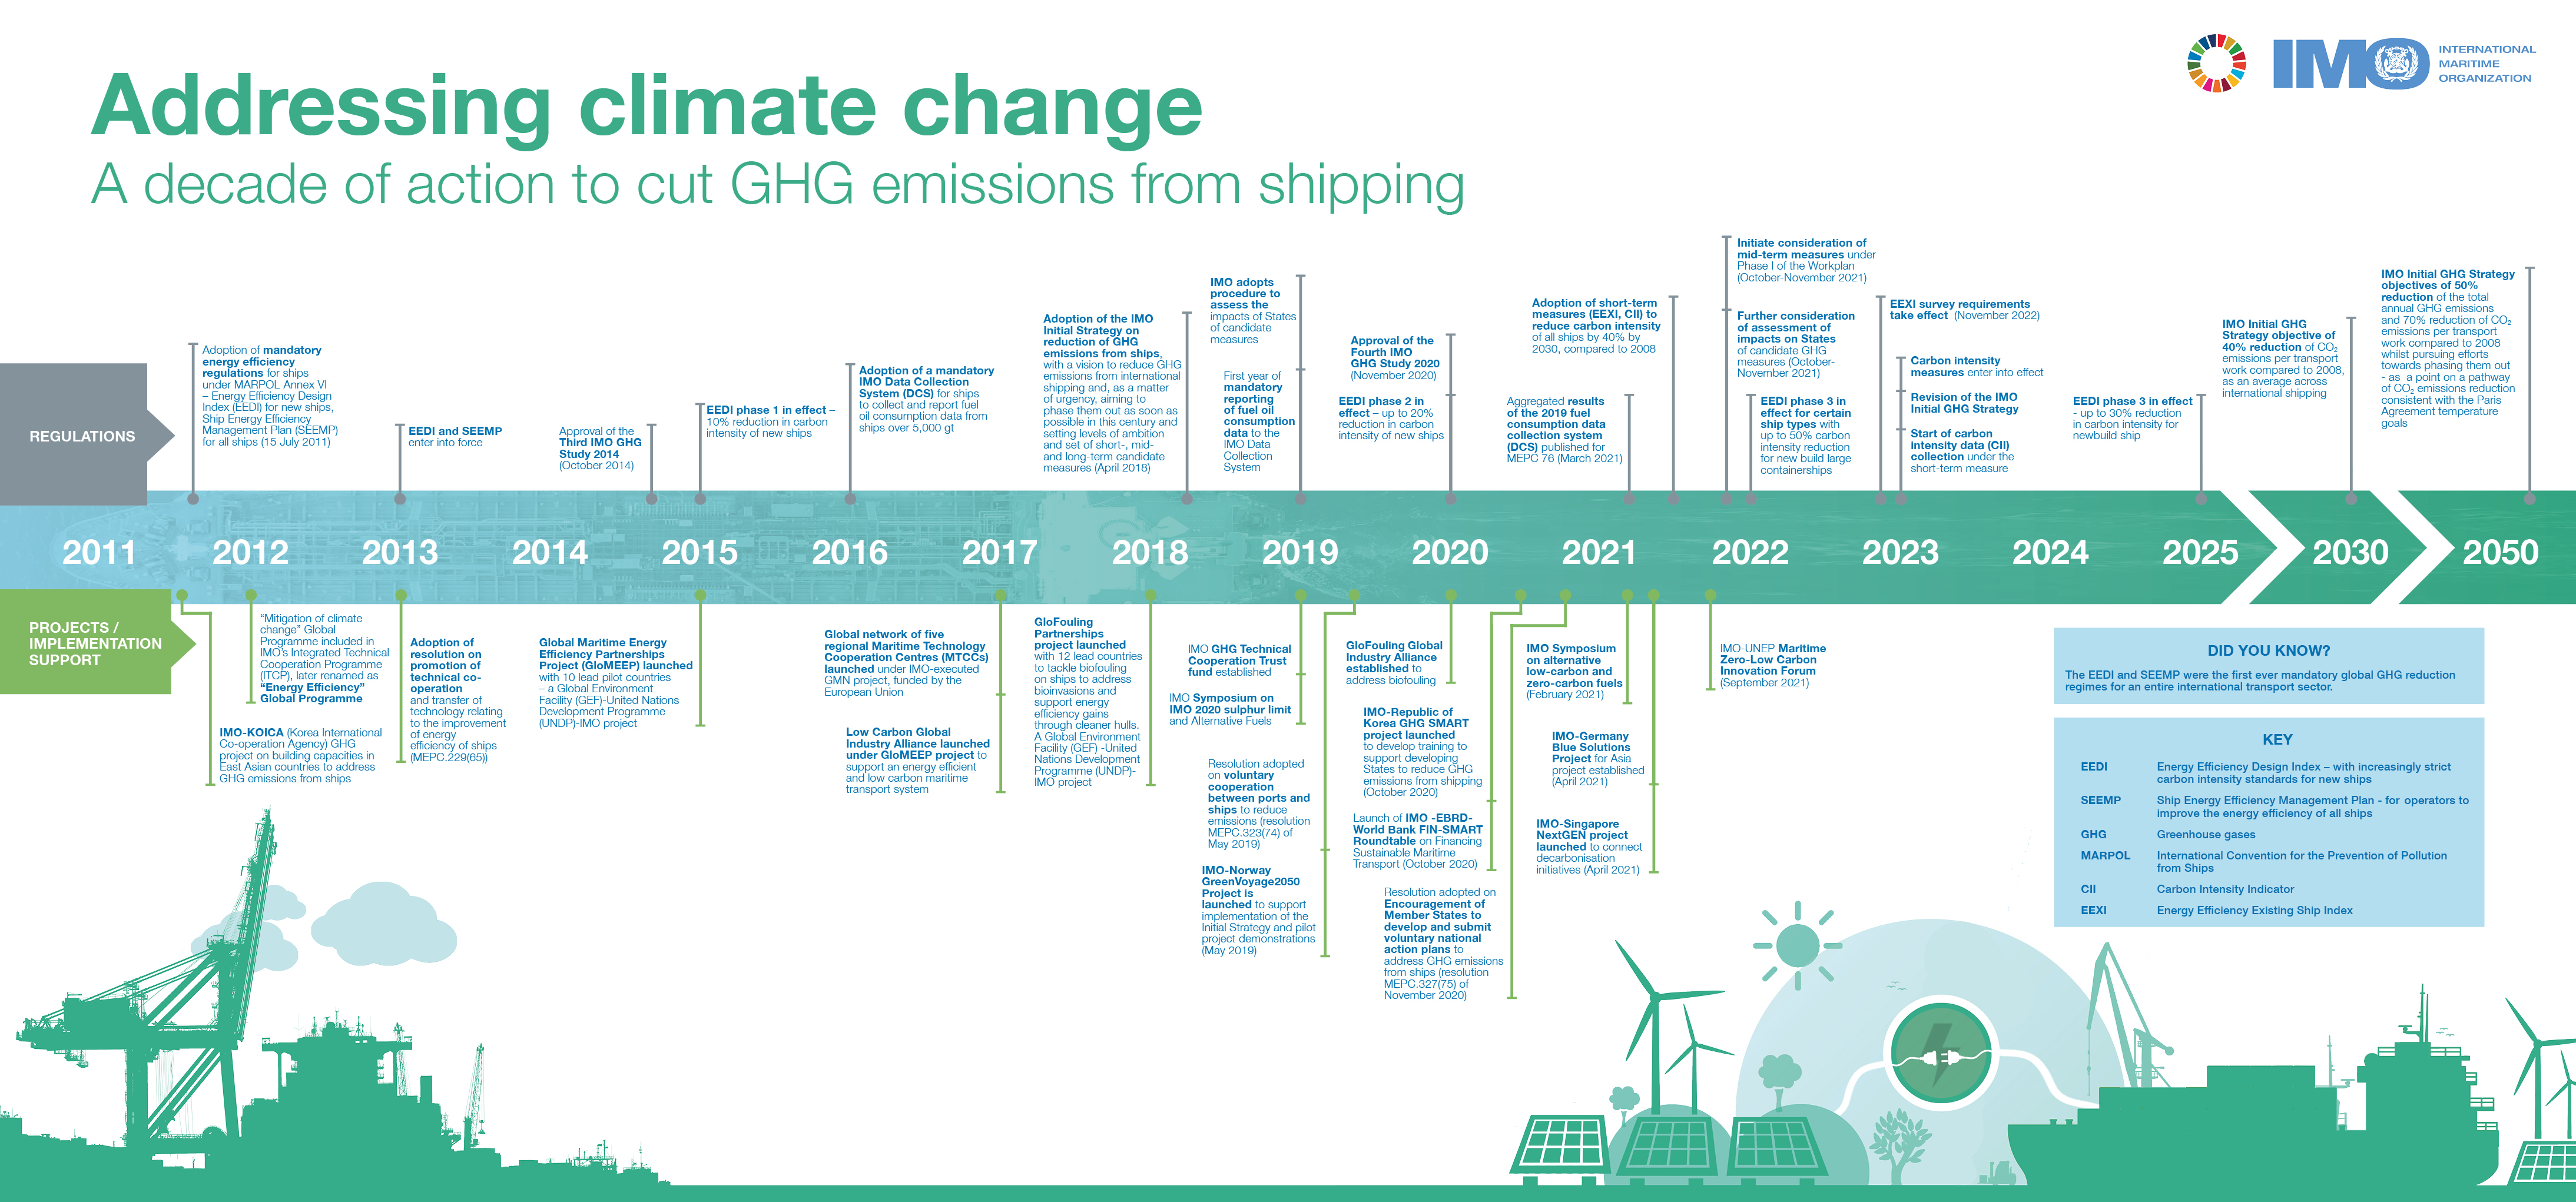 Addressing climate change - a decade of action to cut GHG emissions from shipping_FINAL_(14-07-21)_small.jpg